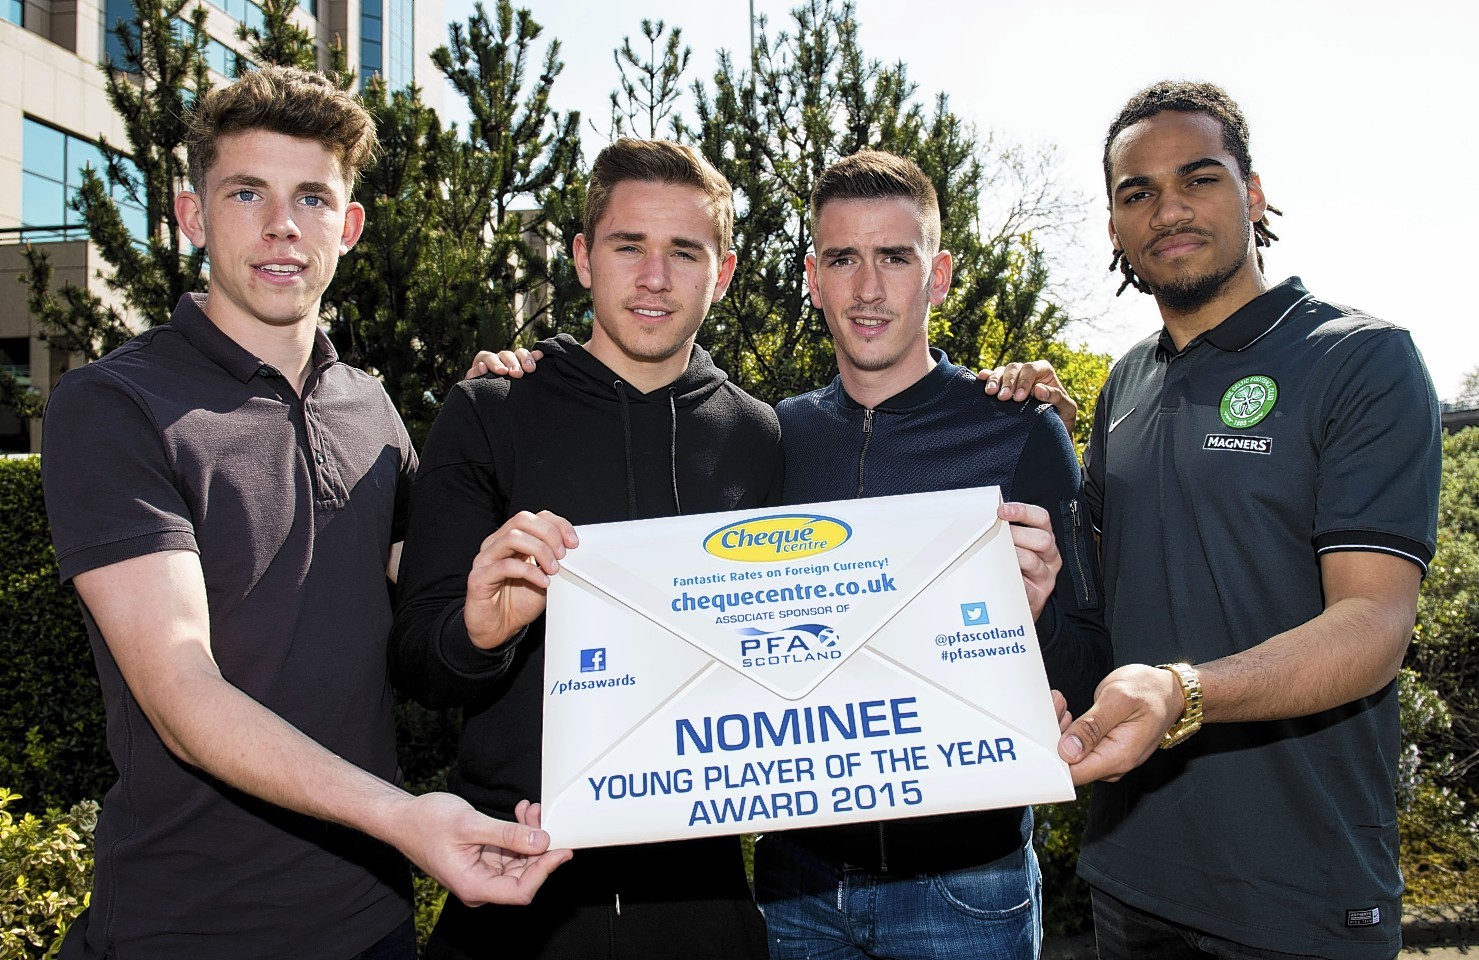 Christie has been named on the shortlist for the PFA young player of the year award